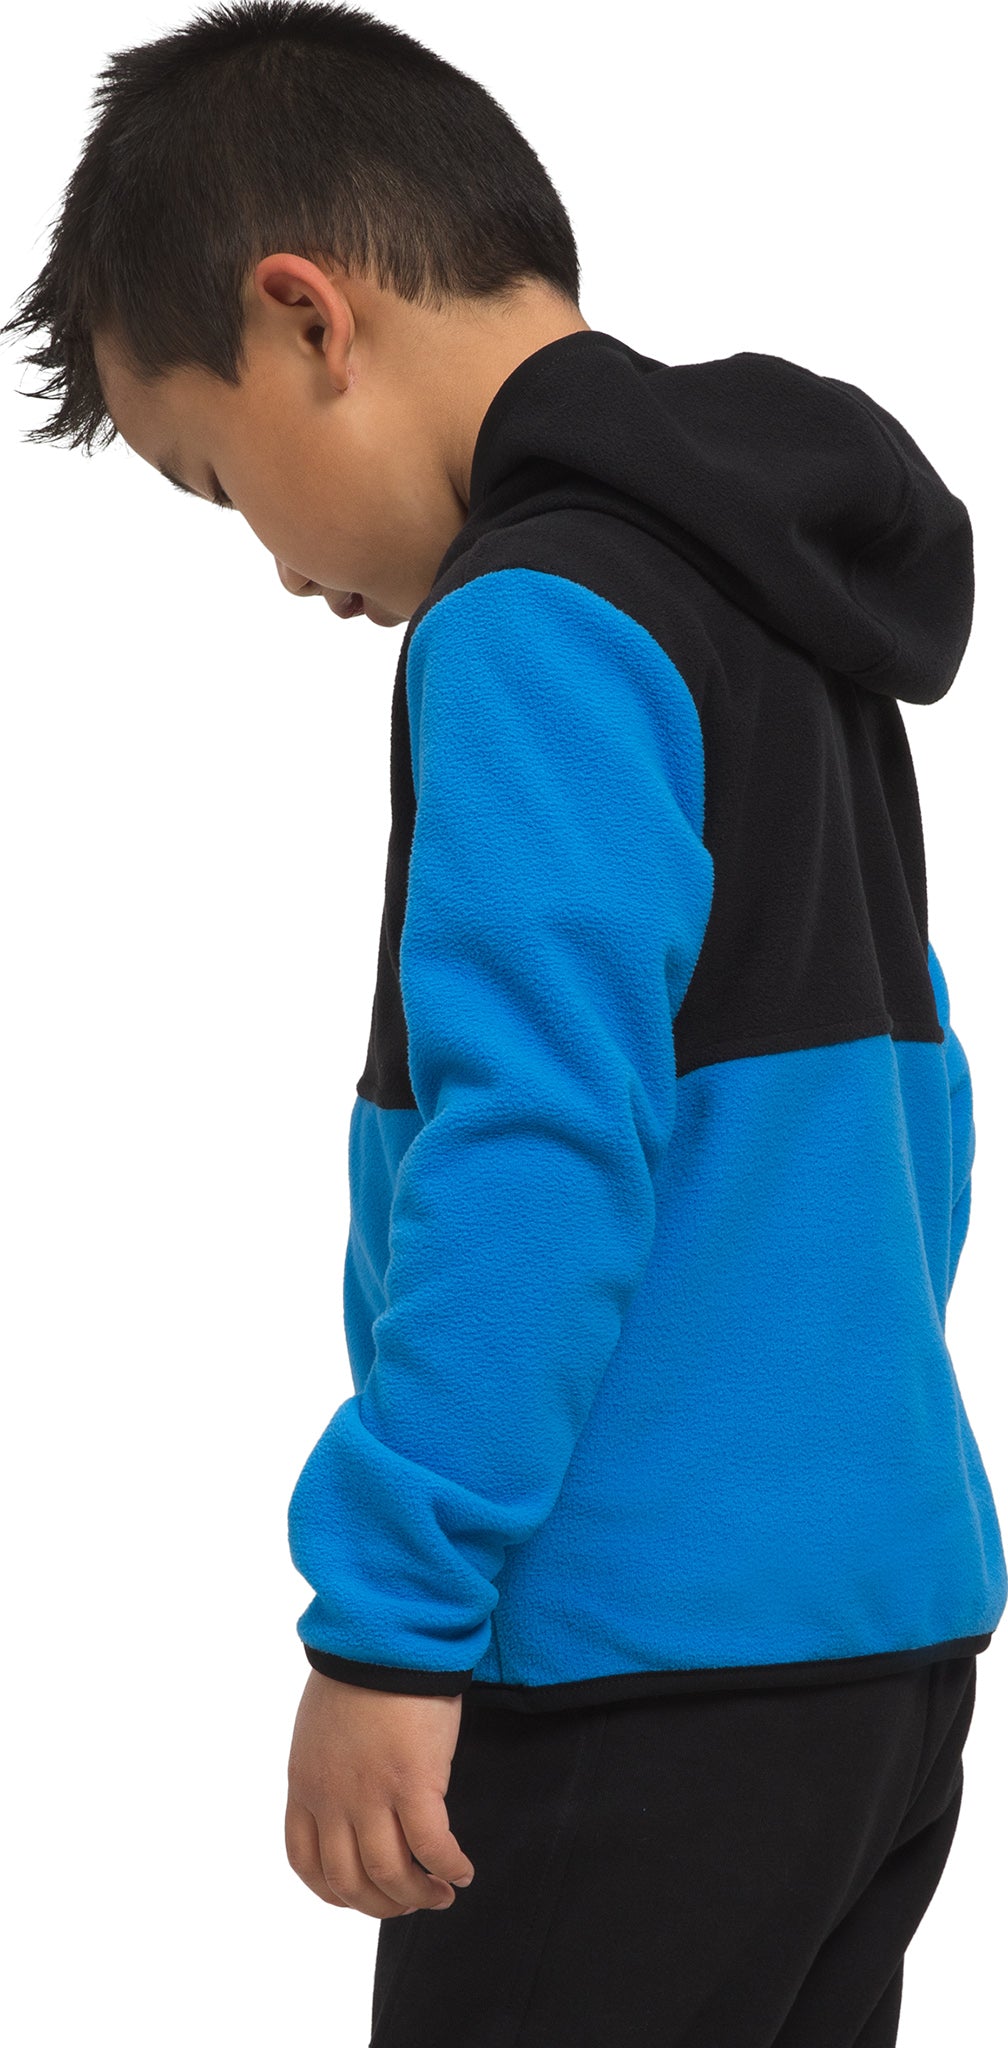 The North Face Glacier Full Zip Hoodie - Kids | Altitude Sports